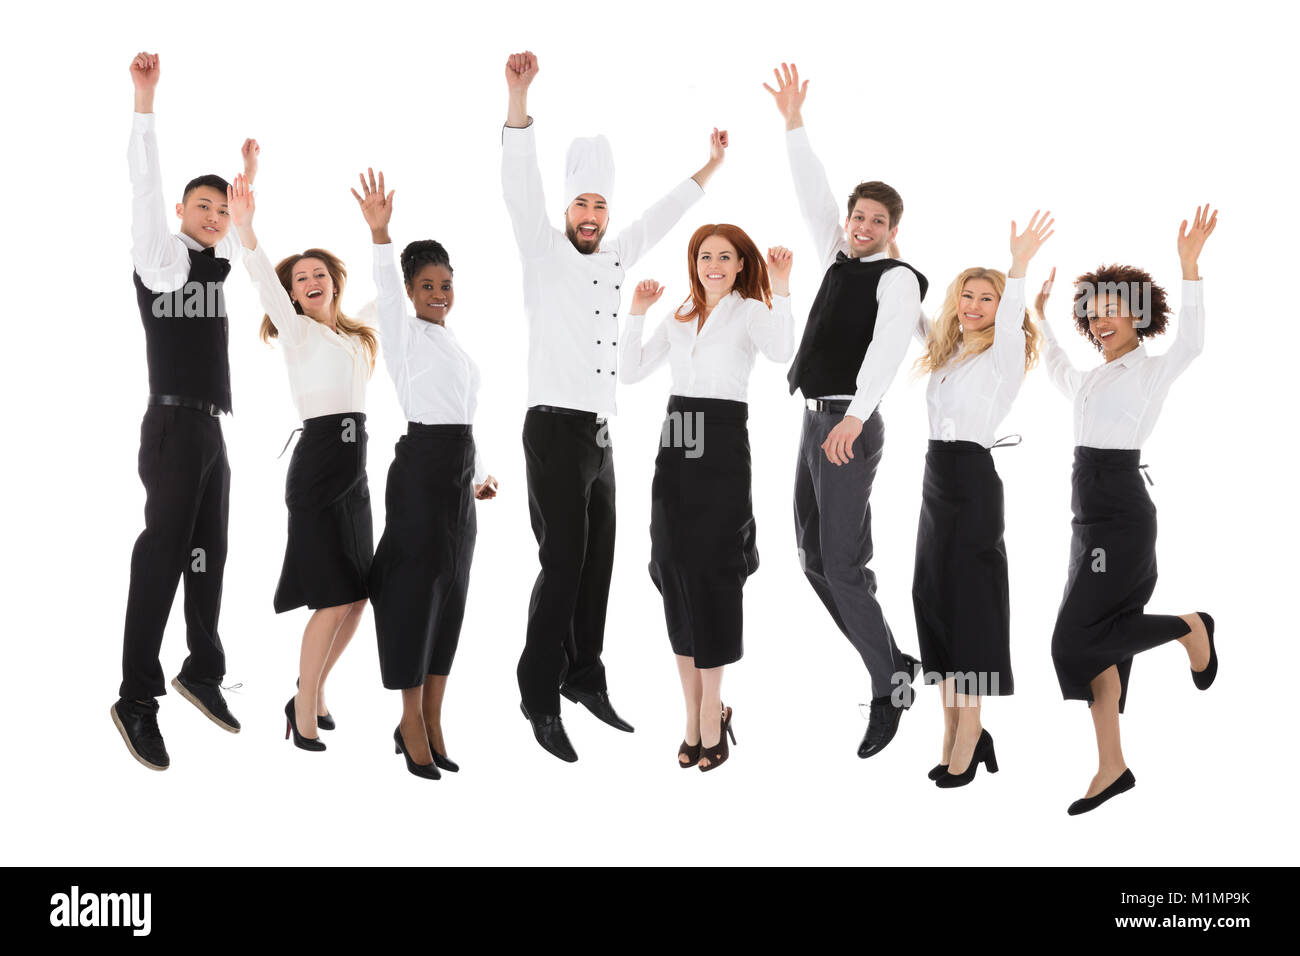 Restaurant Staff Celebrating Their Success Over White Background Stock Photo